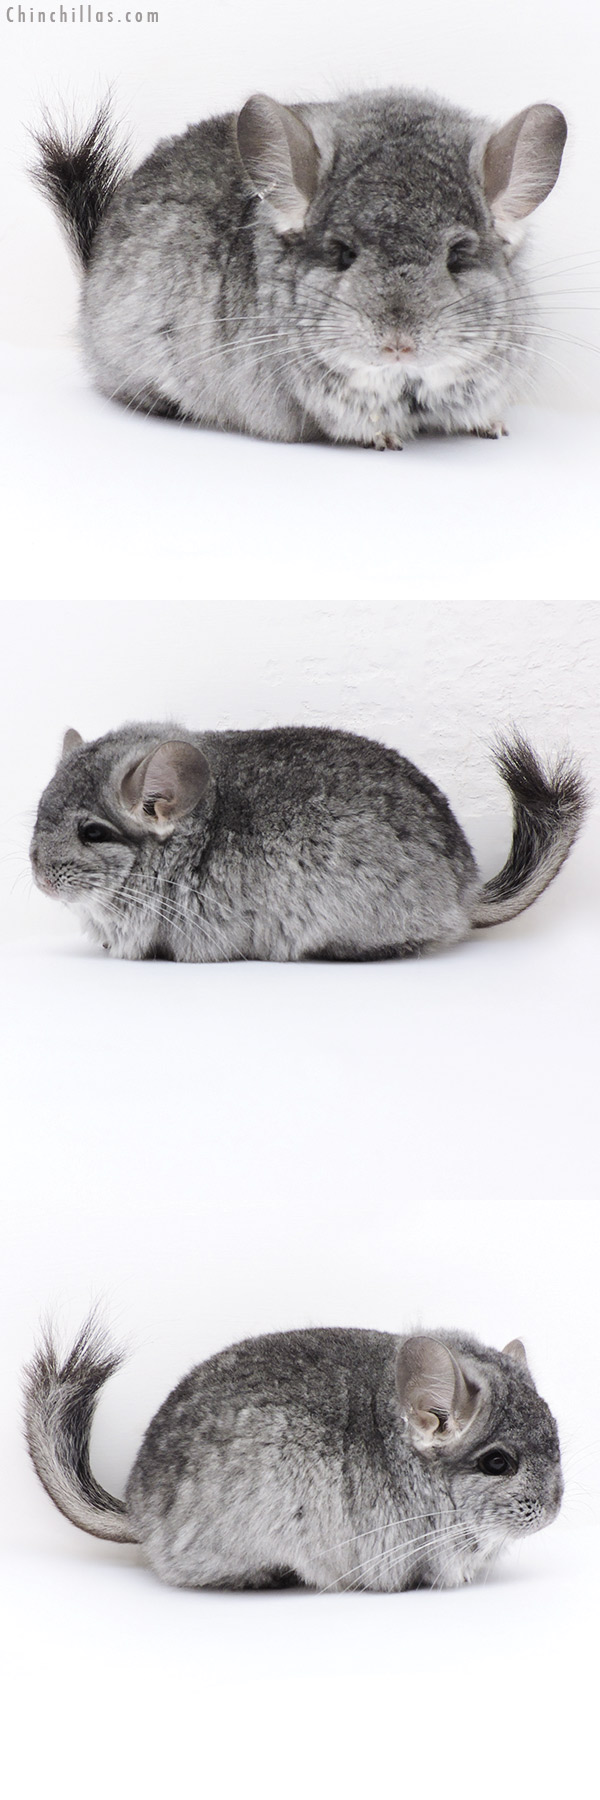 Chinchilla or related item offered for sale or export on Chinchillas.com - 17408 Exceptional Standard  Royal Persian Angora Male Chinchilla